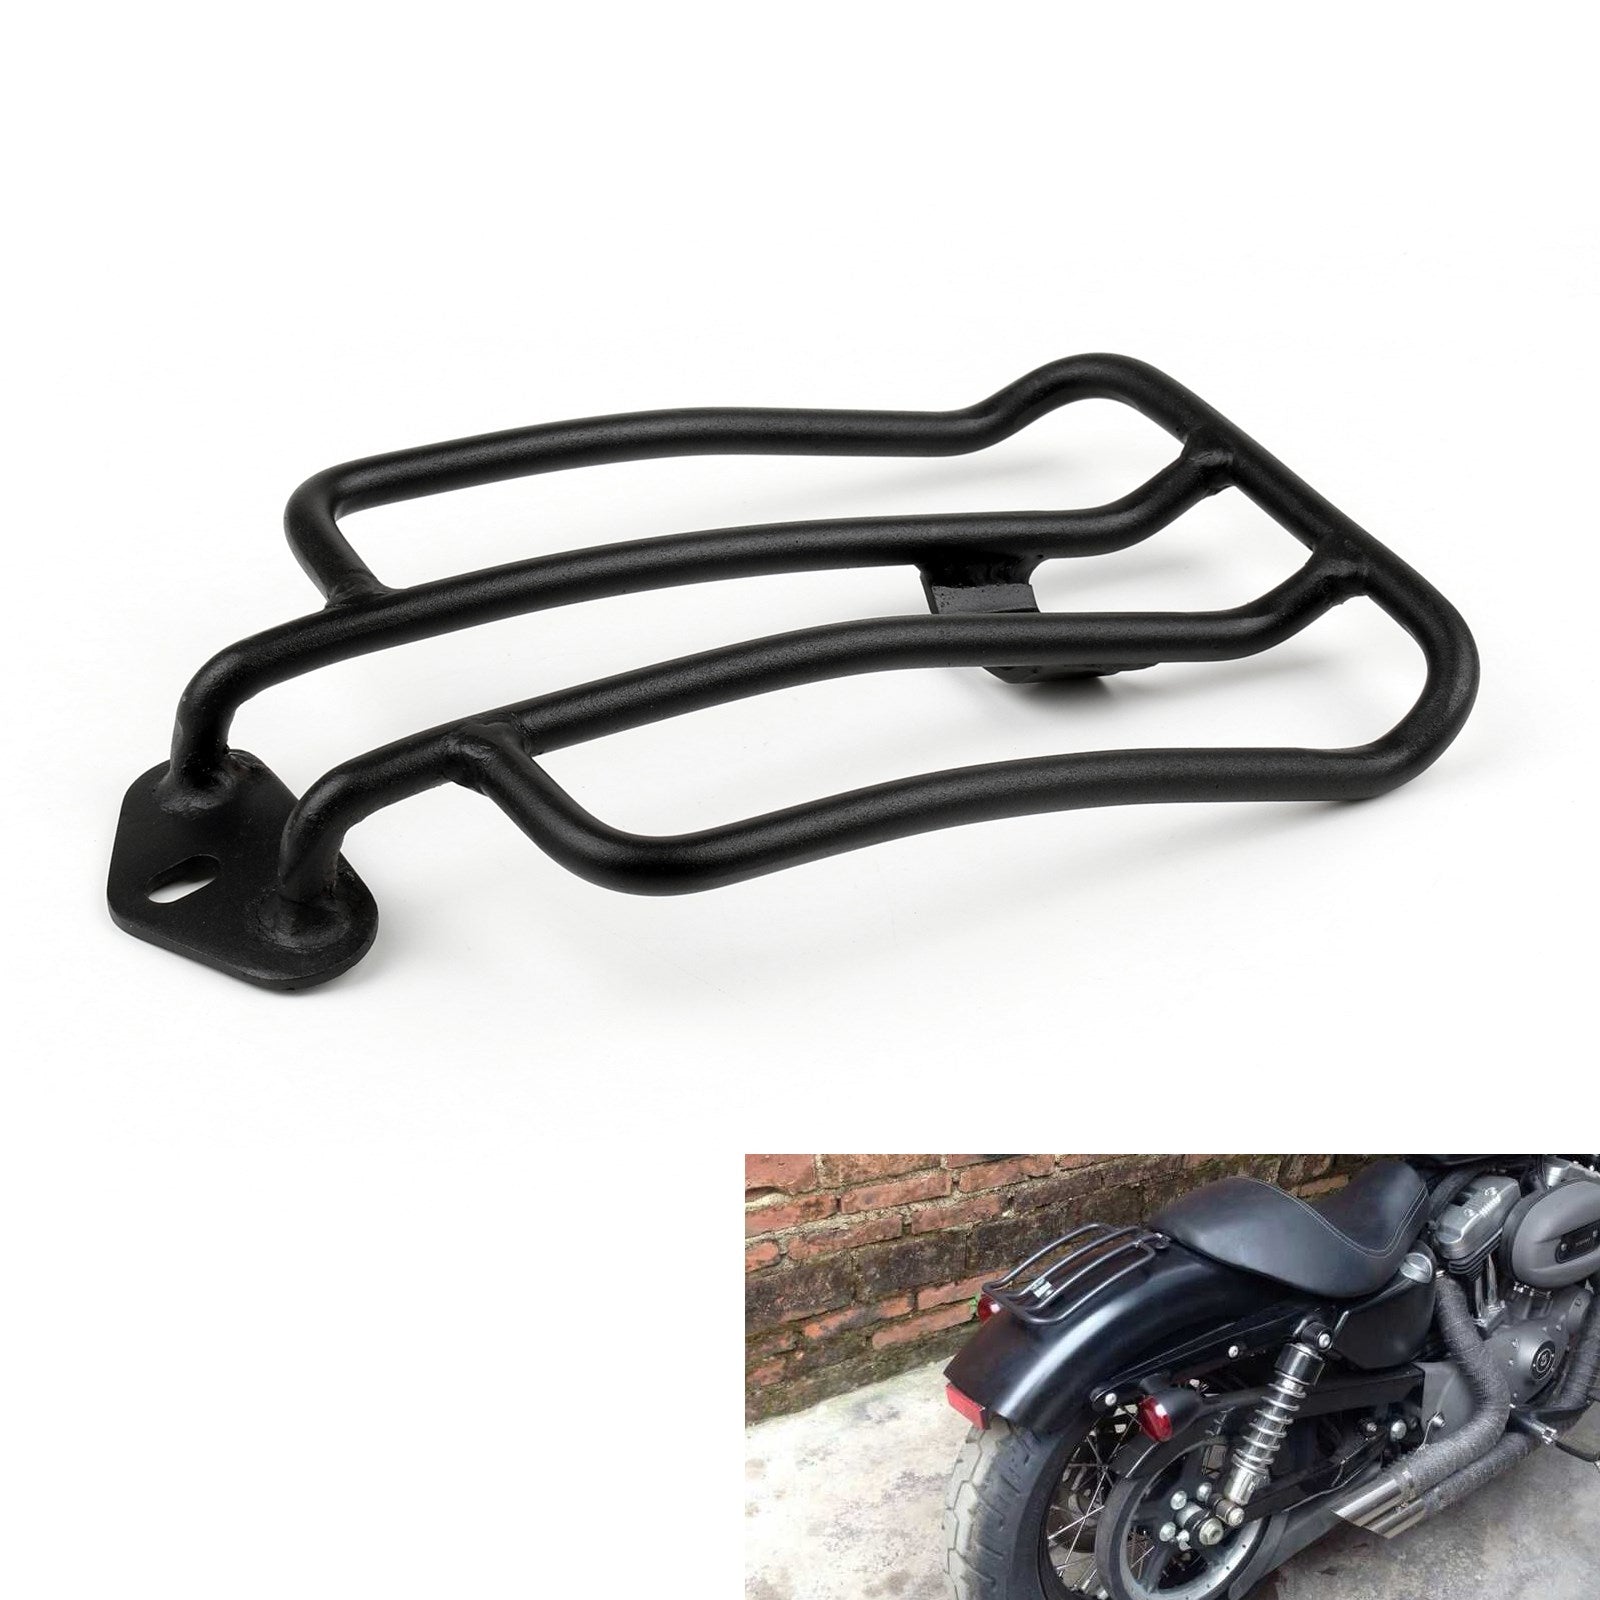 BLK Portapacchi XL883 2004-2015 Sportster Solo 2008 1200 Seat UY Fit 